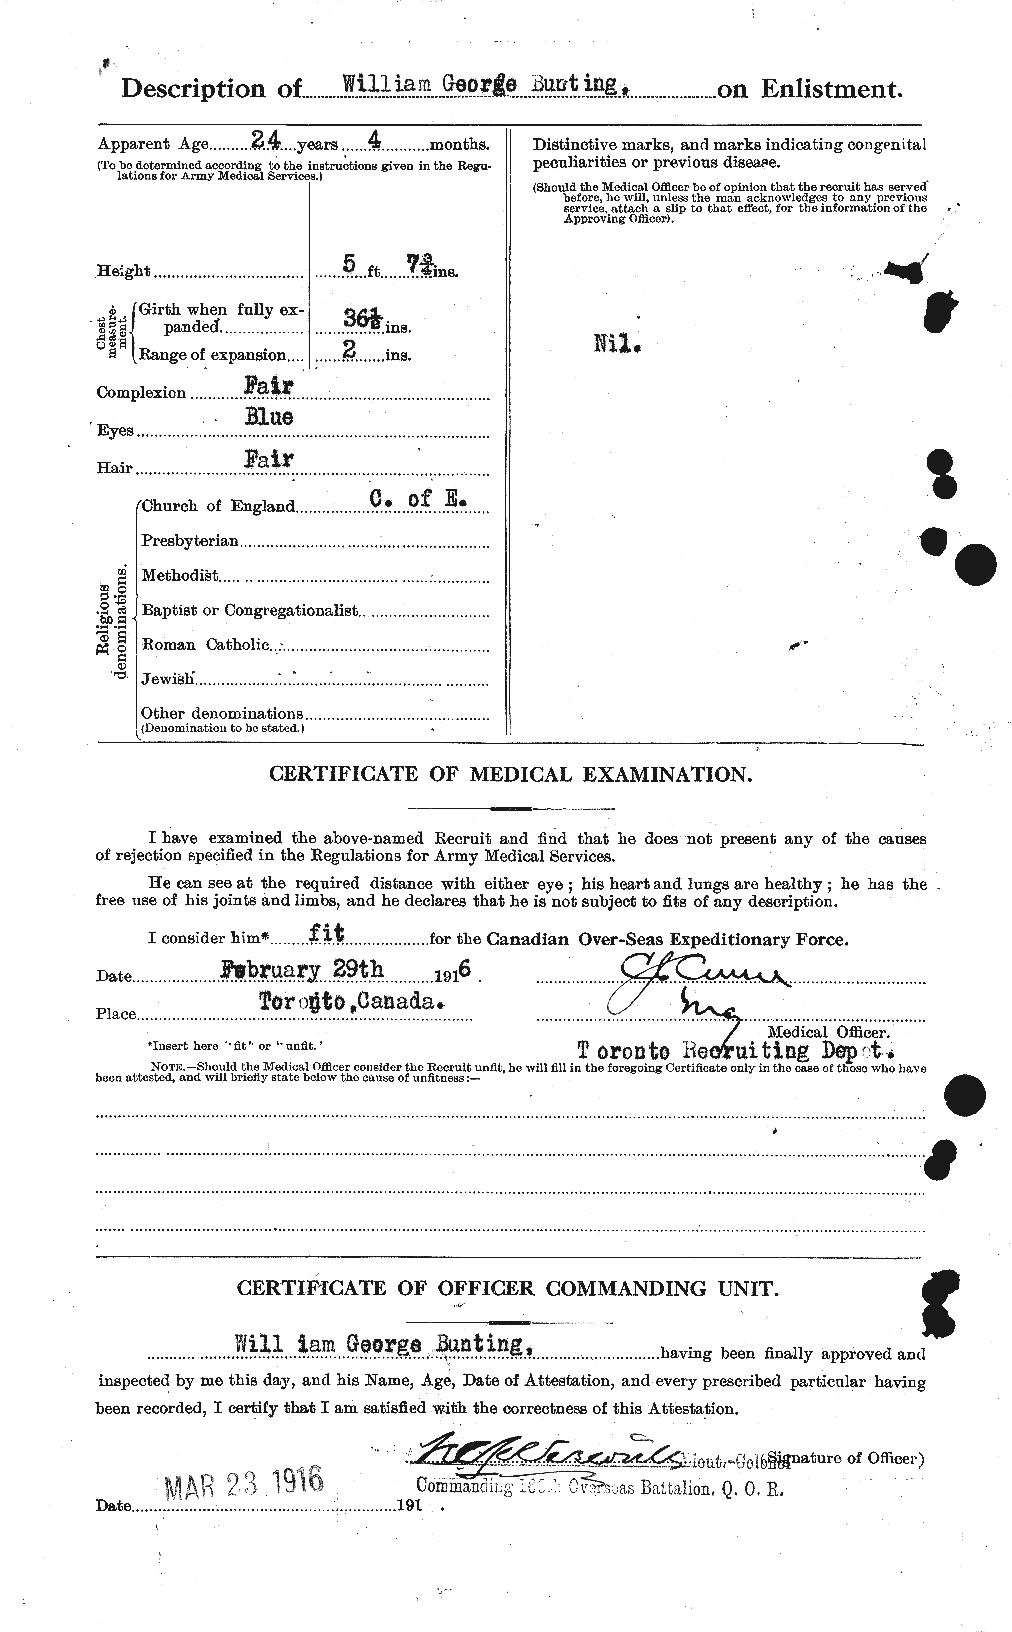 Personnel Records of the First World War - CEF 270967b